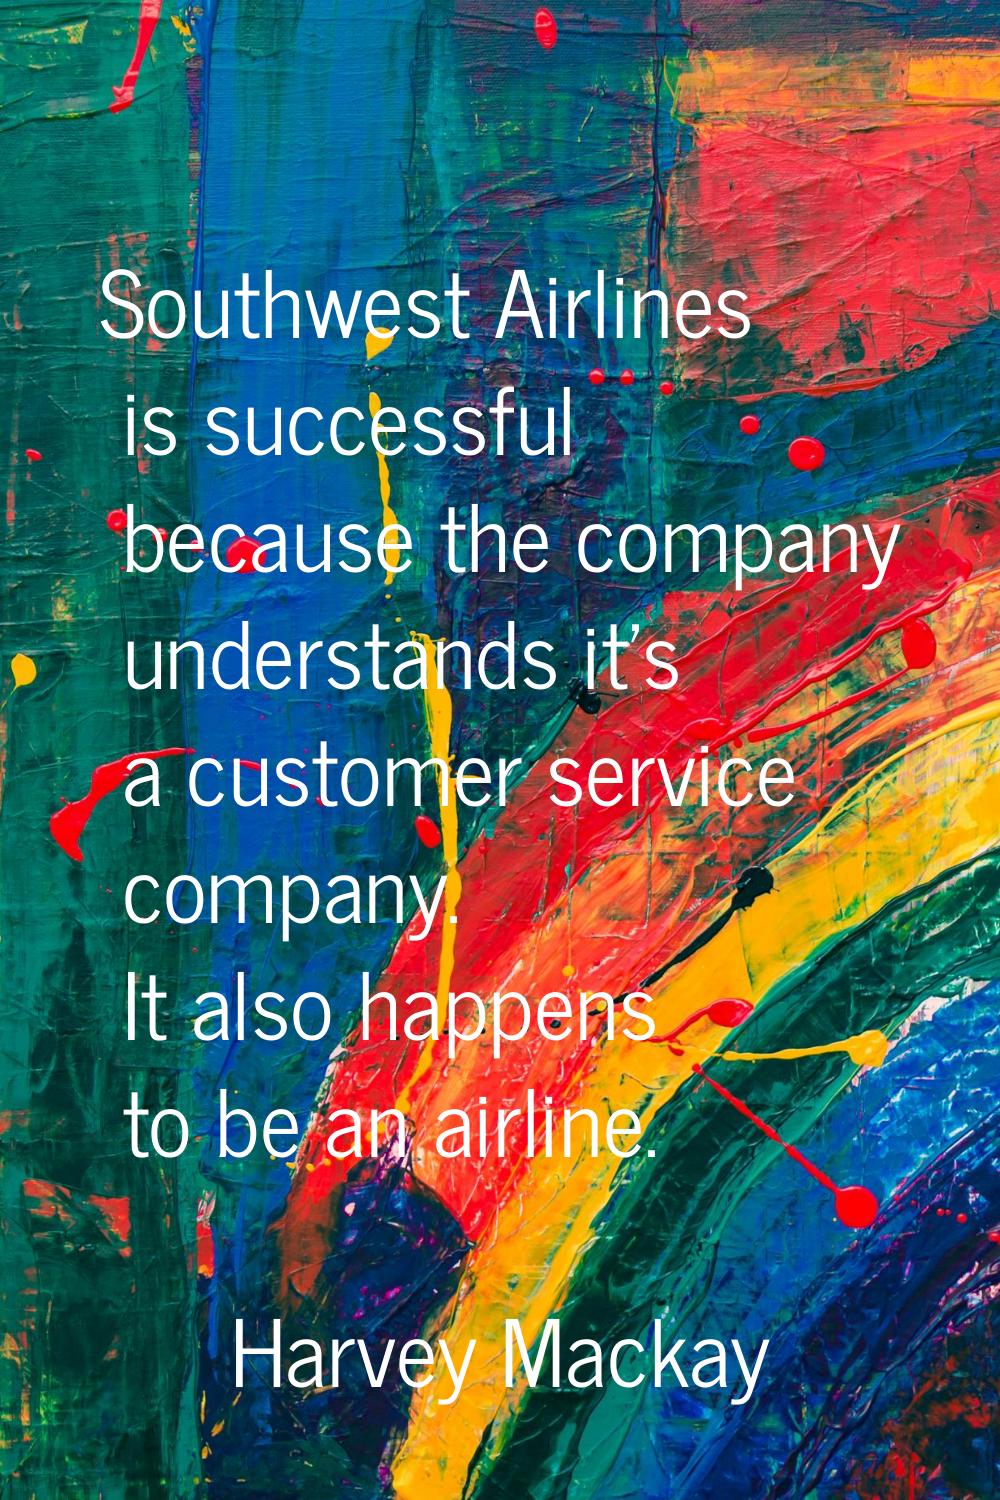 Southwest Airlines is successful because the company understands it's a customer service company. I